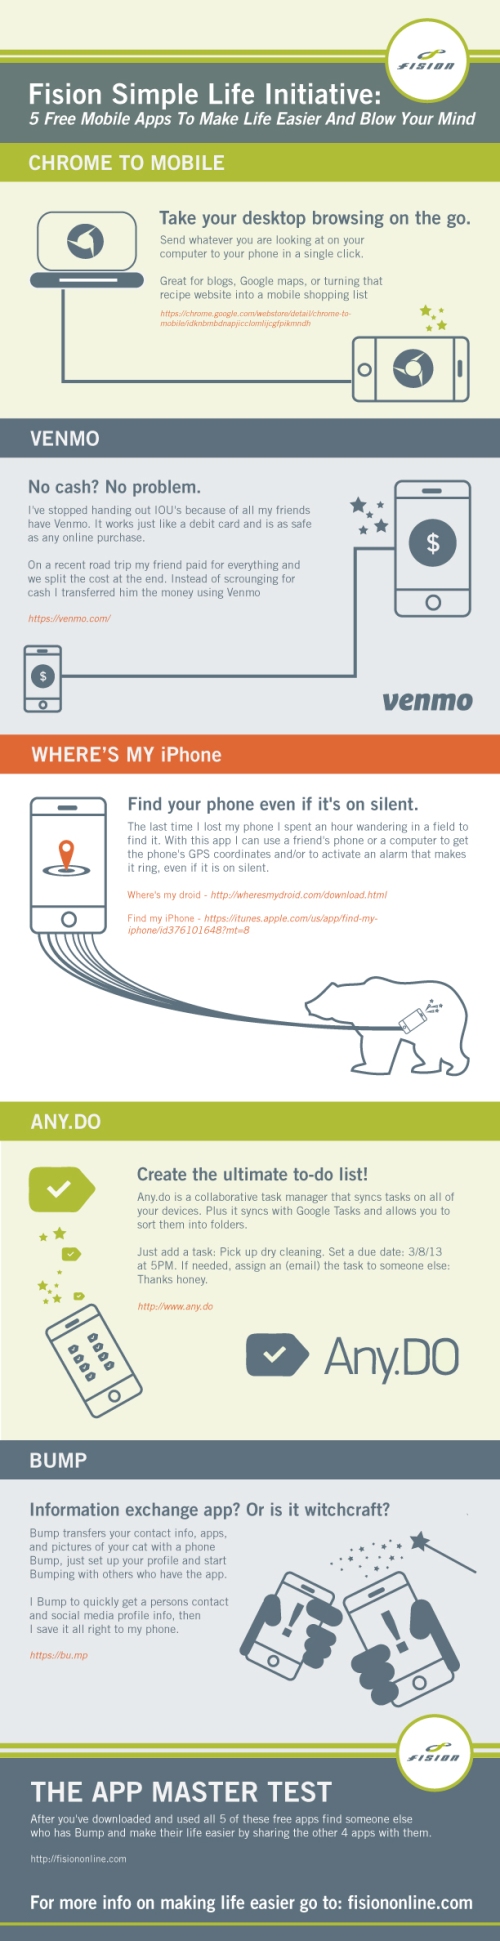 5MobileApps_Infographic